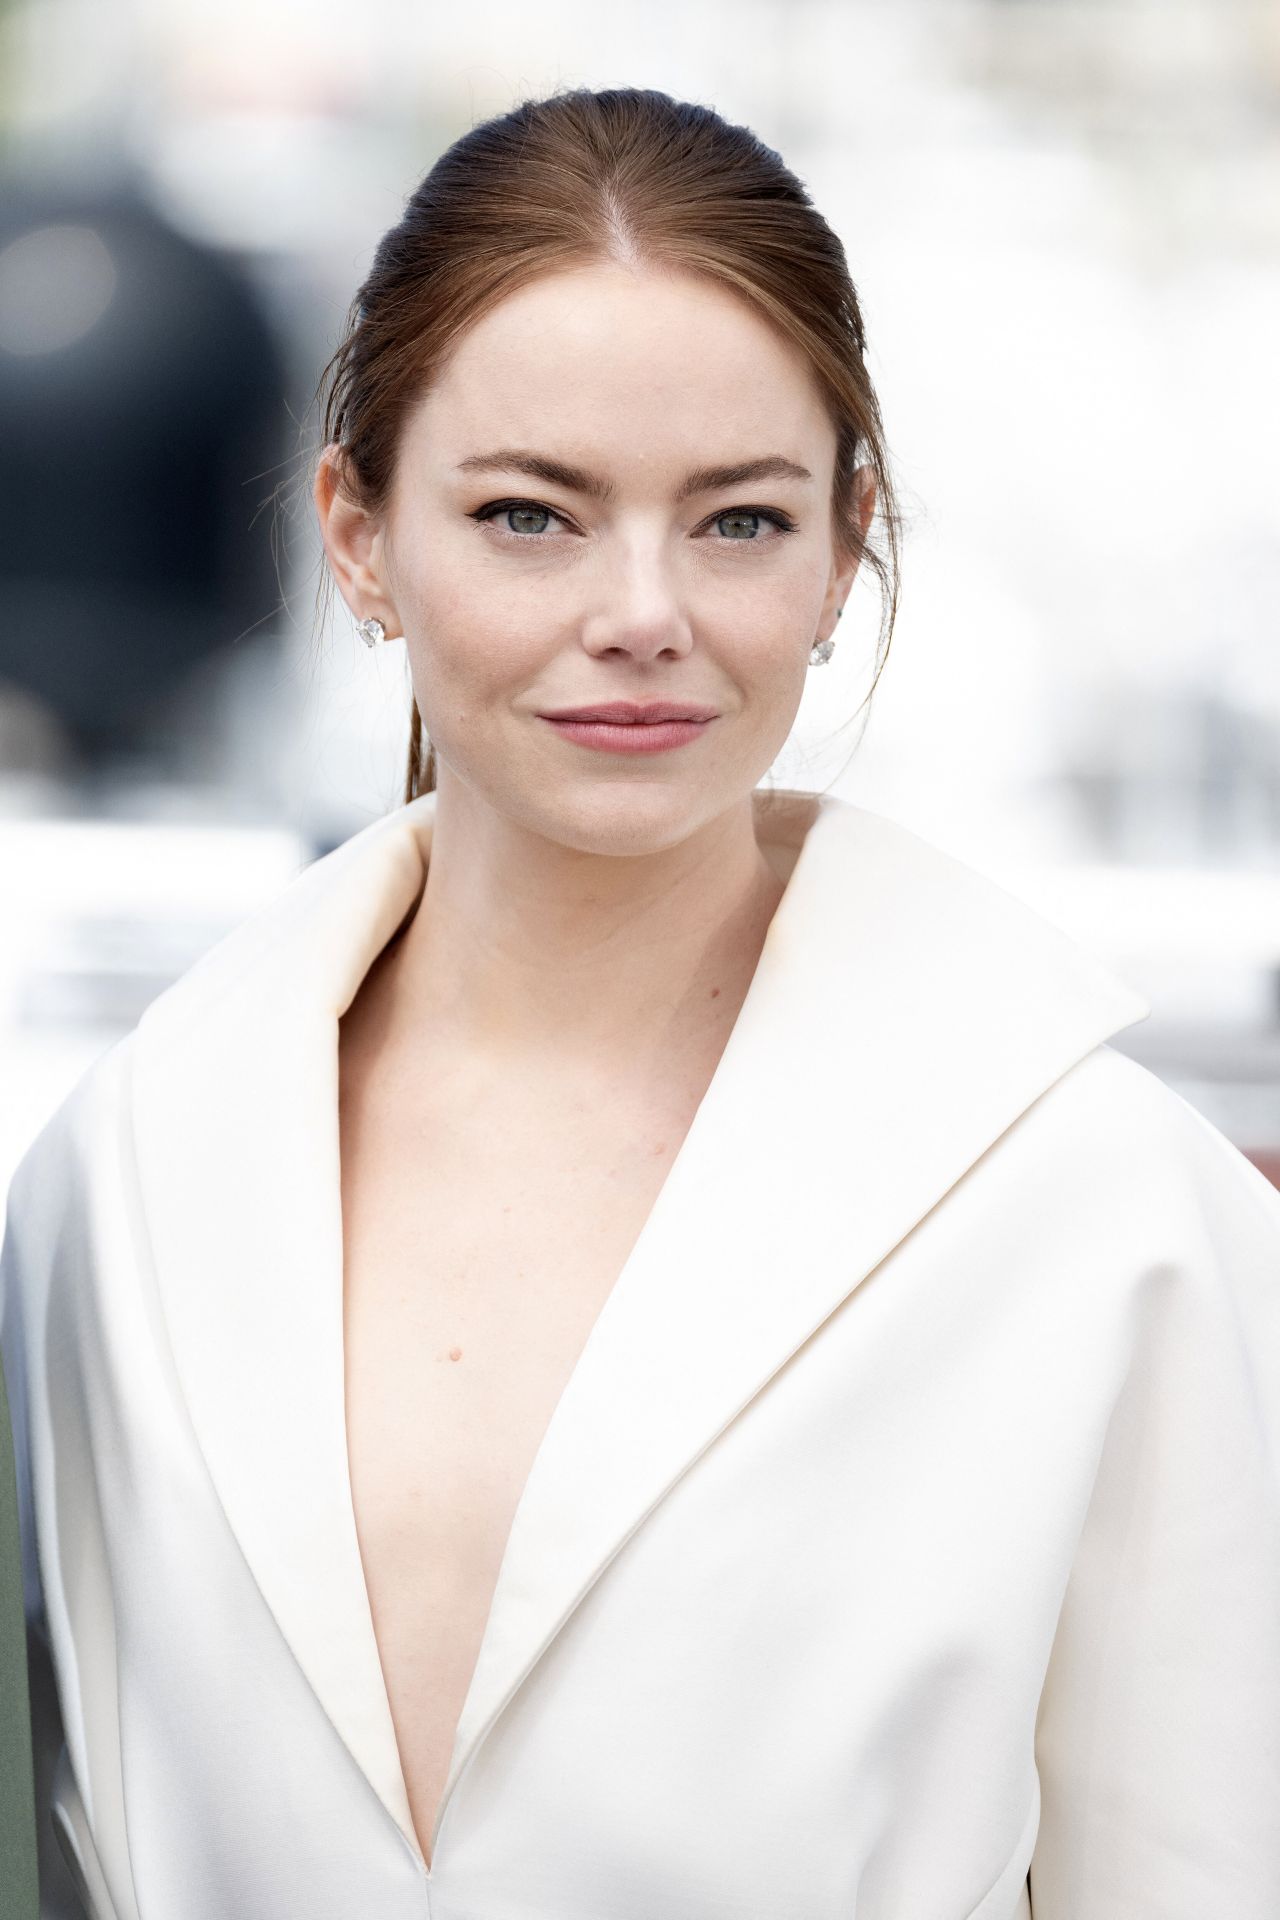 EMMA STONE AT KINDS OF KINDNESS PHOTOCALL IN CANNES FILM FESTIVAL07